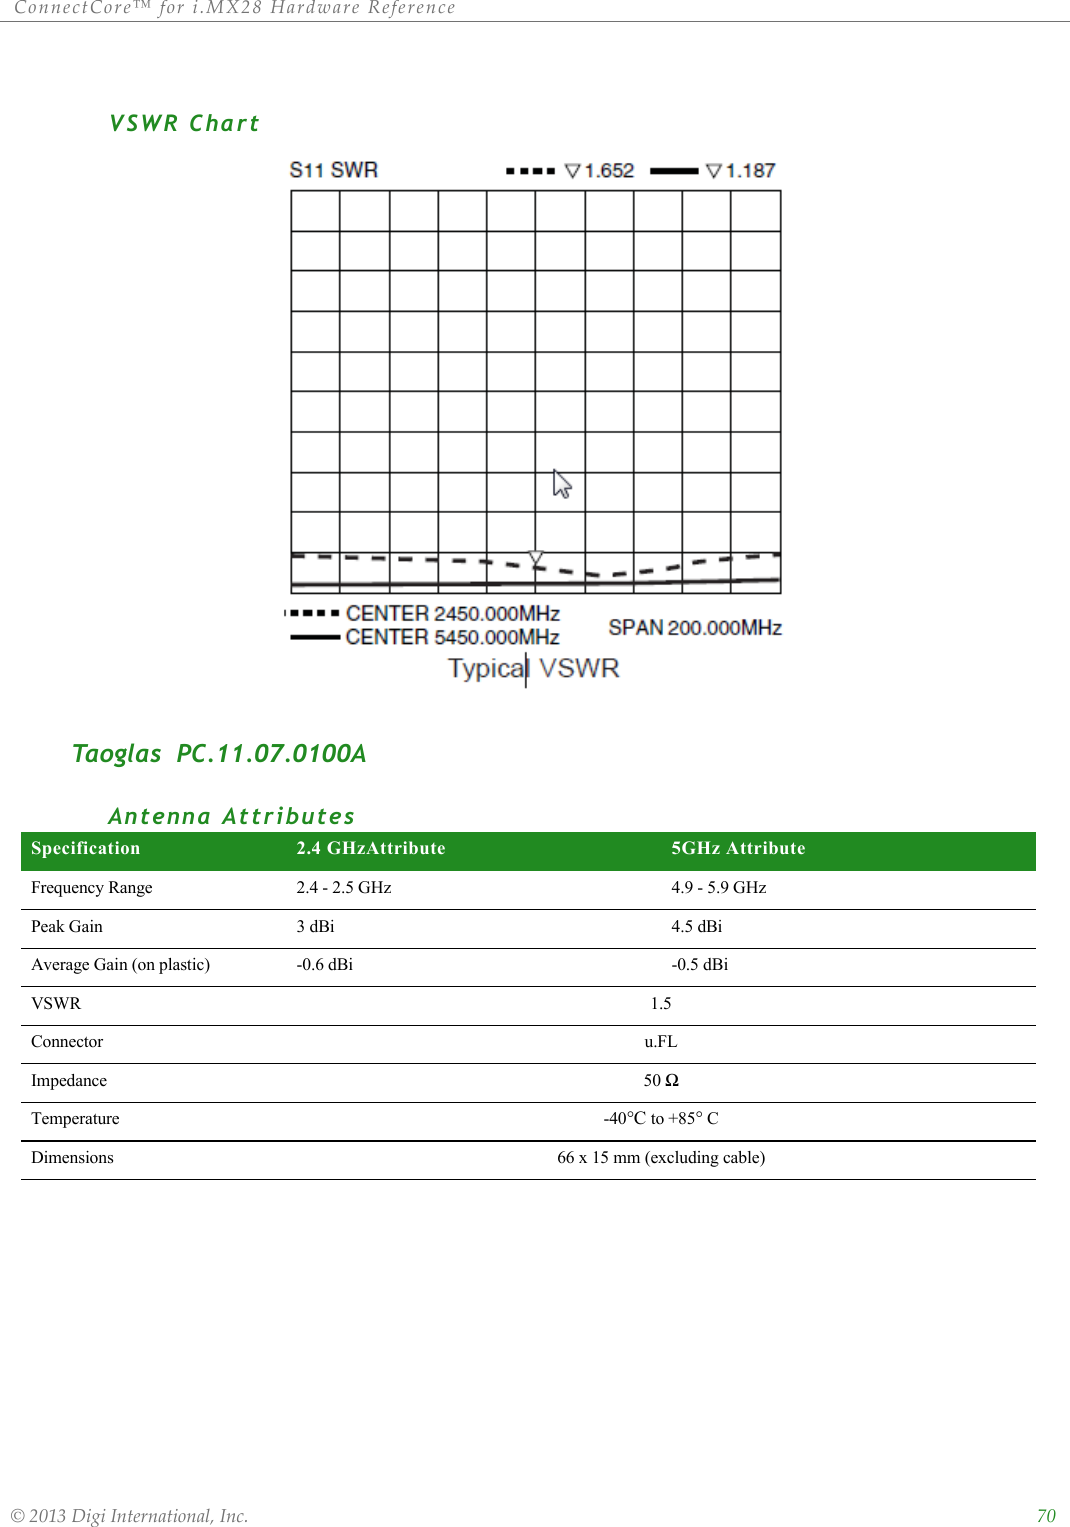 ConnectCore™ for i.MX28 Hardware Reference  © 2013 Digi International, Inc.    70VSWR ChartTaoglas  PC.11.07.0100AAntenna AttributesSpecification 2.4 GHzAttribute 5GHz AttributeFrequency Range 2.4 - 2.5 GHz 4.9 - 5.9 GHzPeak Gain 3 dBi 4.5 dBiAverage Gain (on plastic) -0.6 dBi -0.5 dBiVSWR 1.5Connector u.FLImpedance 50 ΩTemperature -40°C to +85° CDimensions 66 x 15 mm (excluding cable)